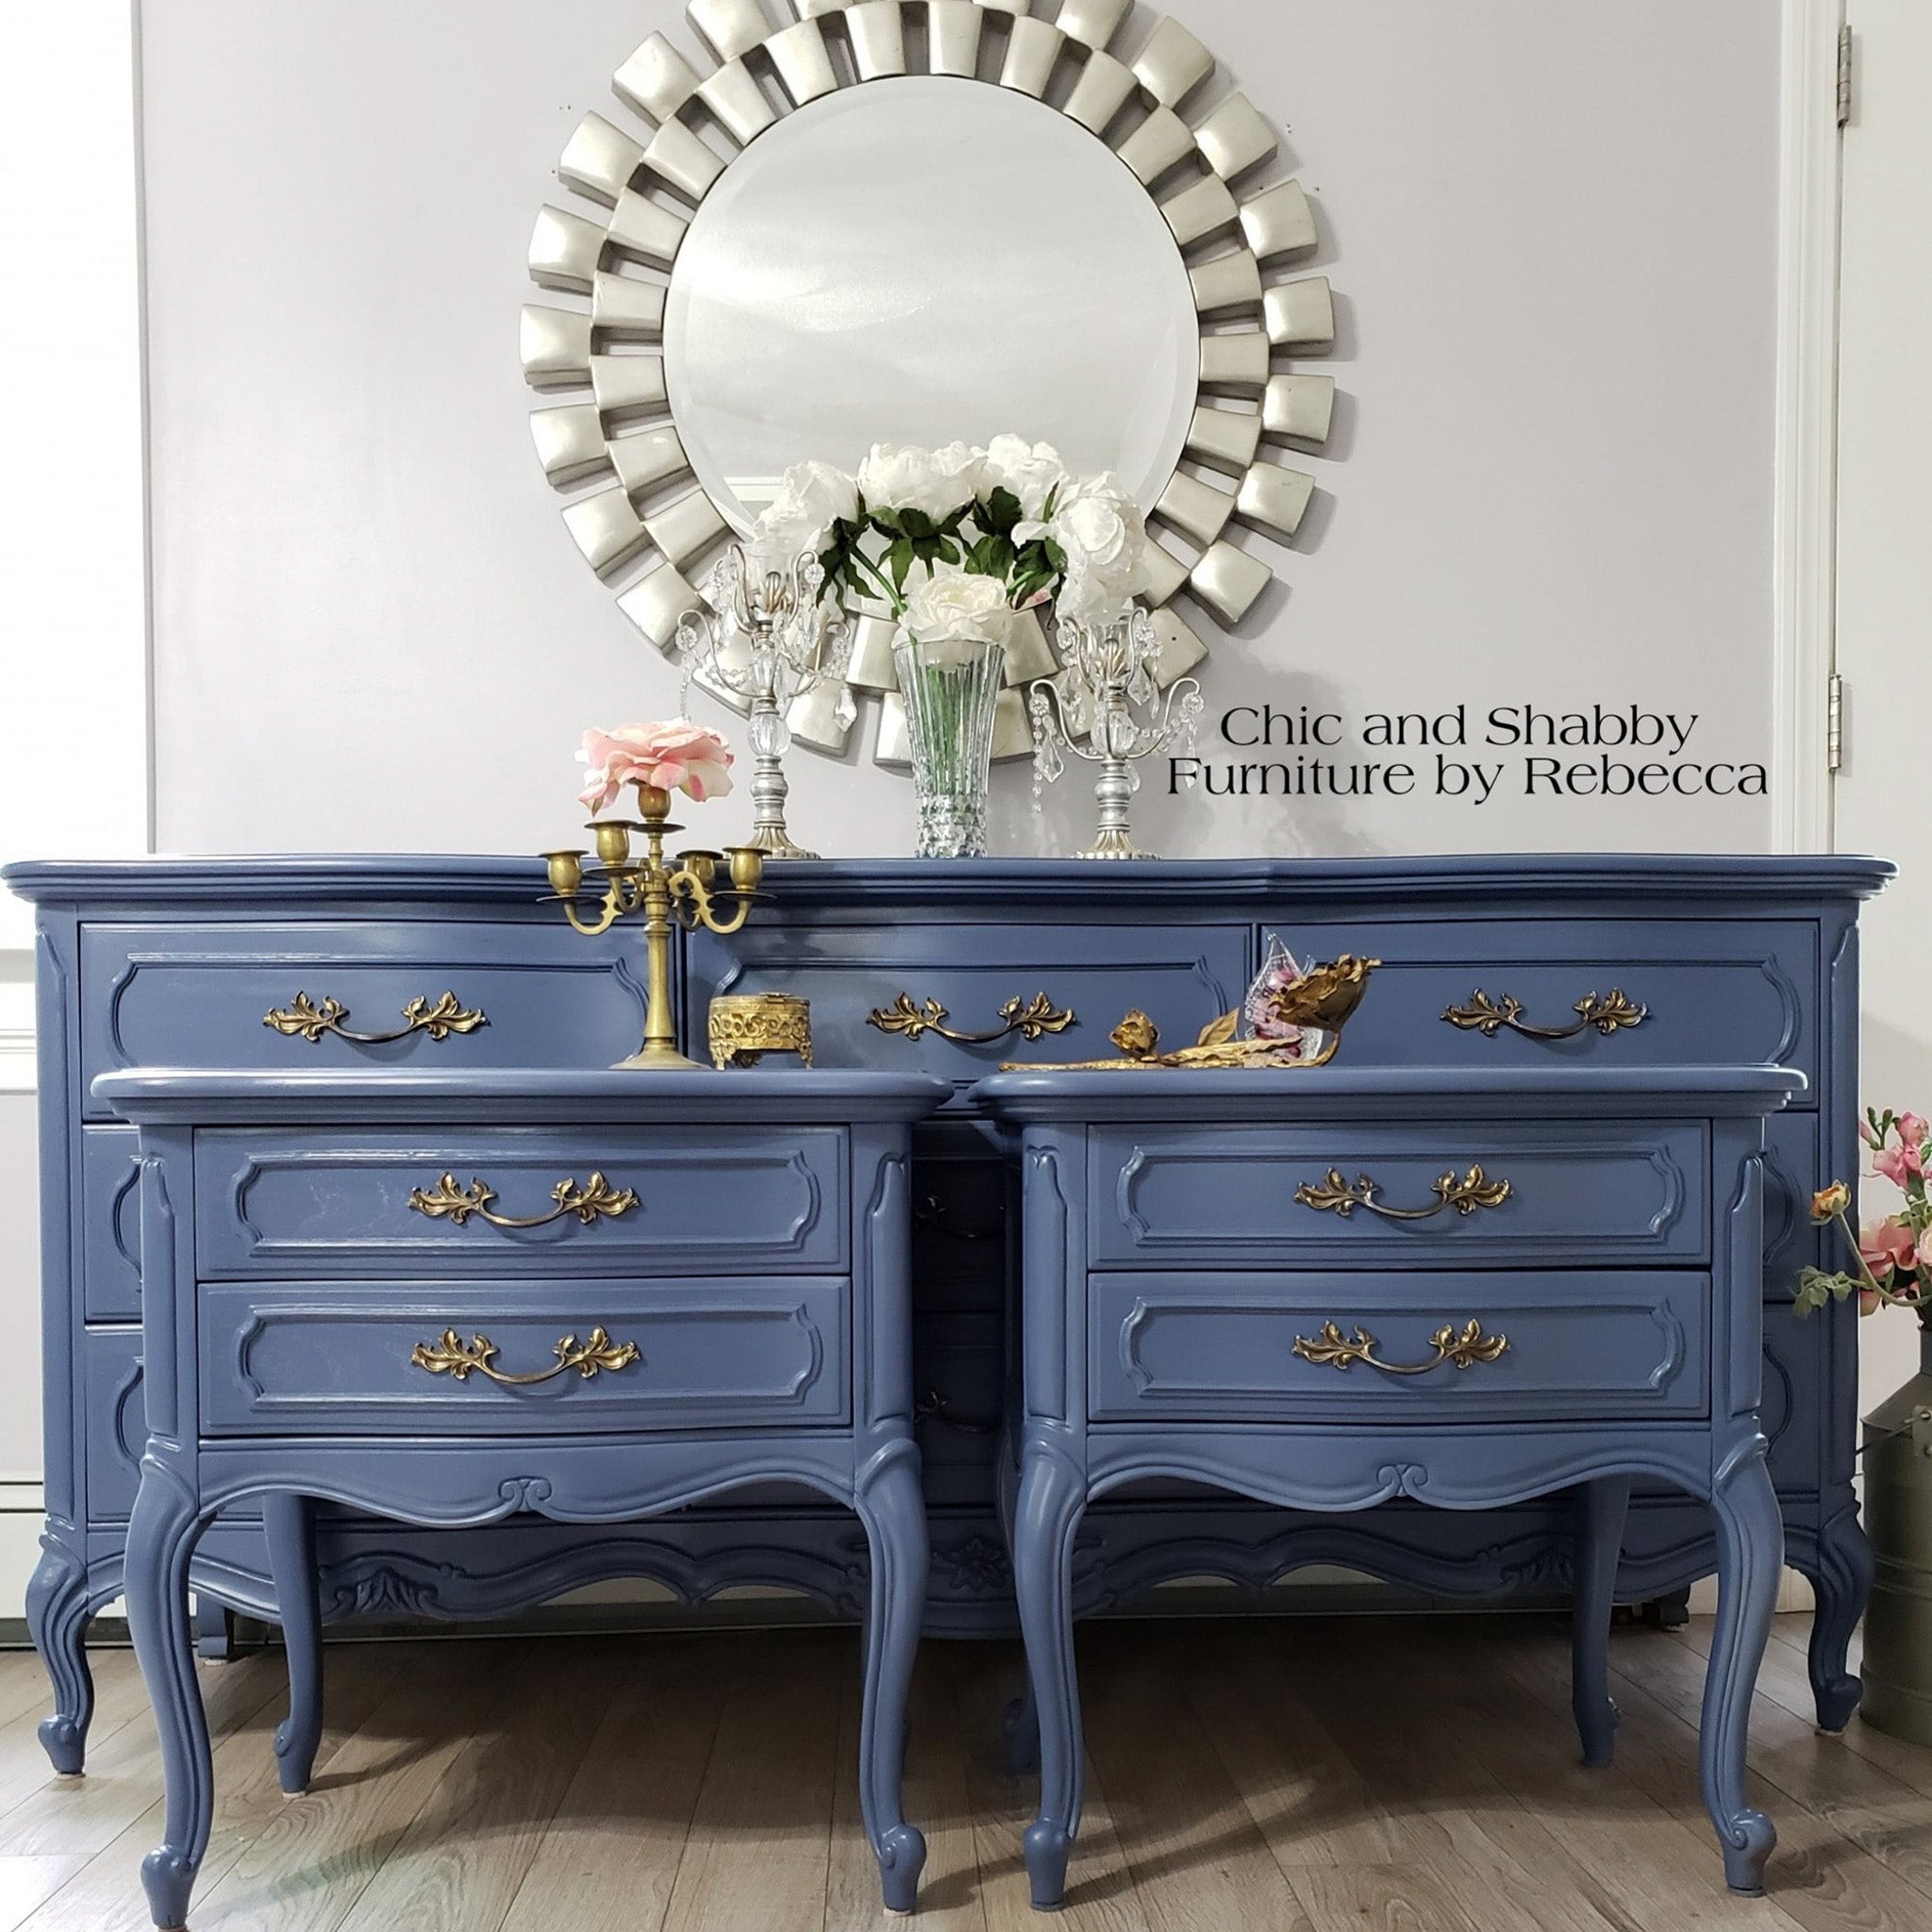 A large vintage 9-drawer dresser and and 2 matching 2-drawer nightstands refurbished by Chic and Shabby Furniture by Rebecca are painted in Dixie Belle's Yankee Blue chalk mineral paint.